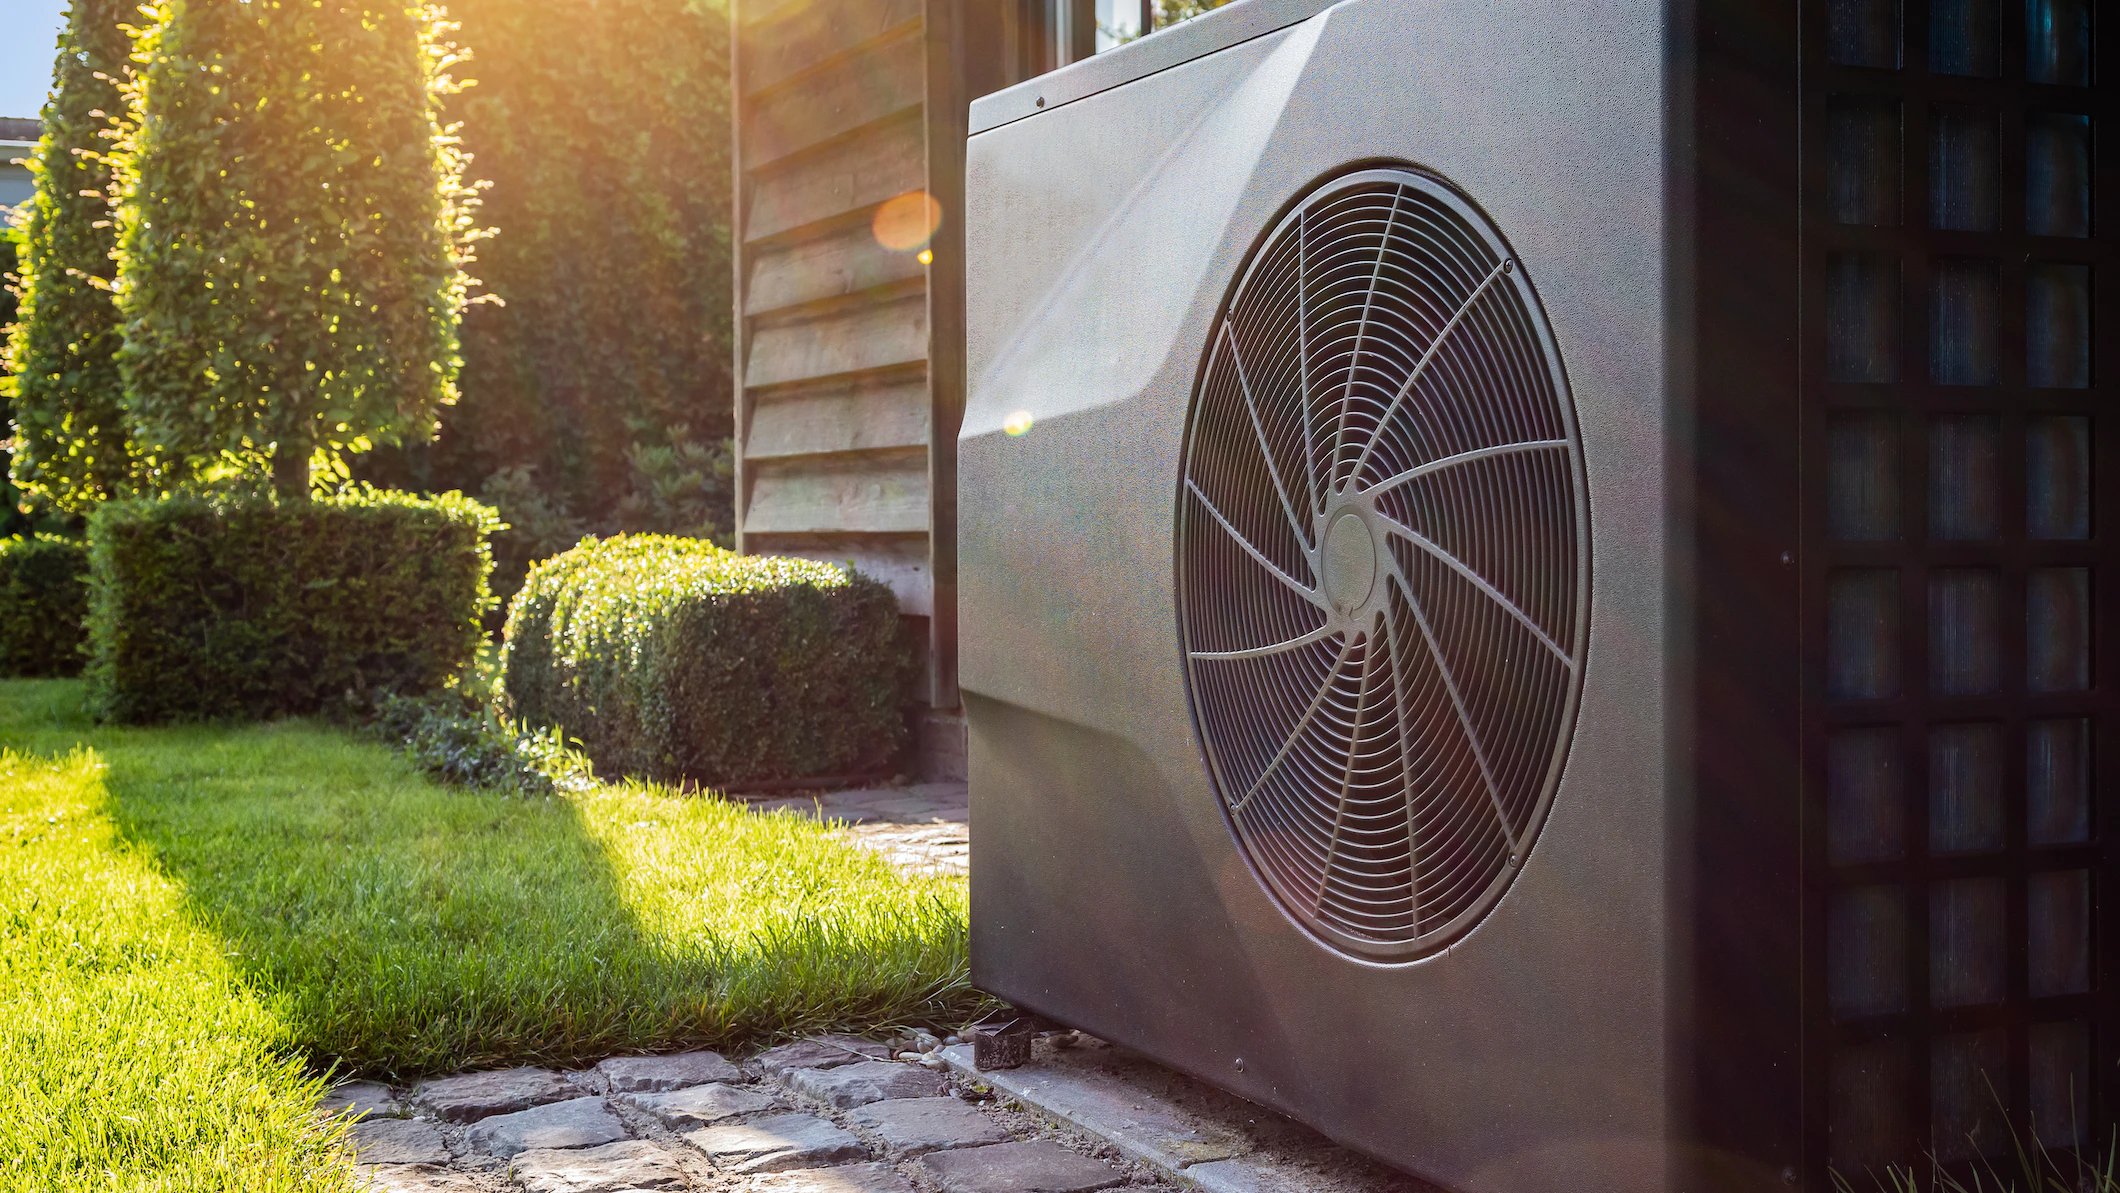 The global energy crisis is driving a surge in heat pumps, bringing energy security and climate benefits